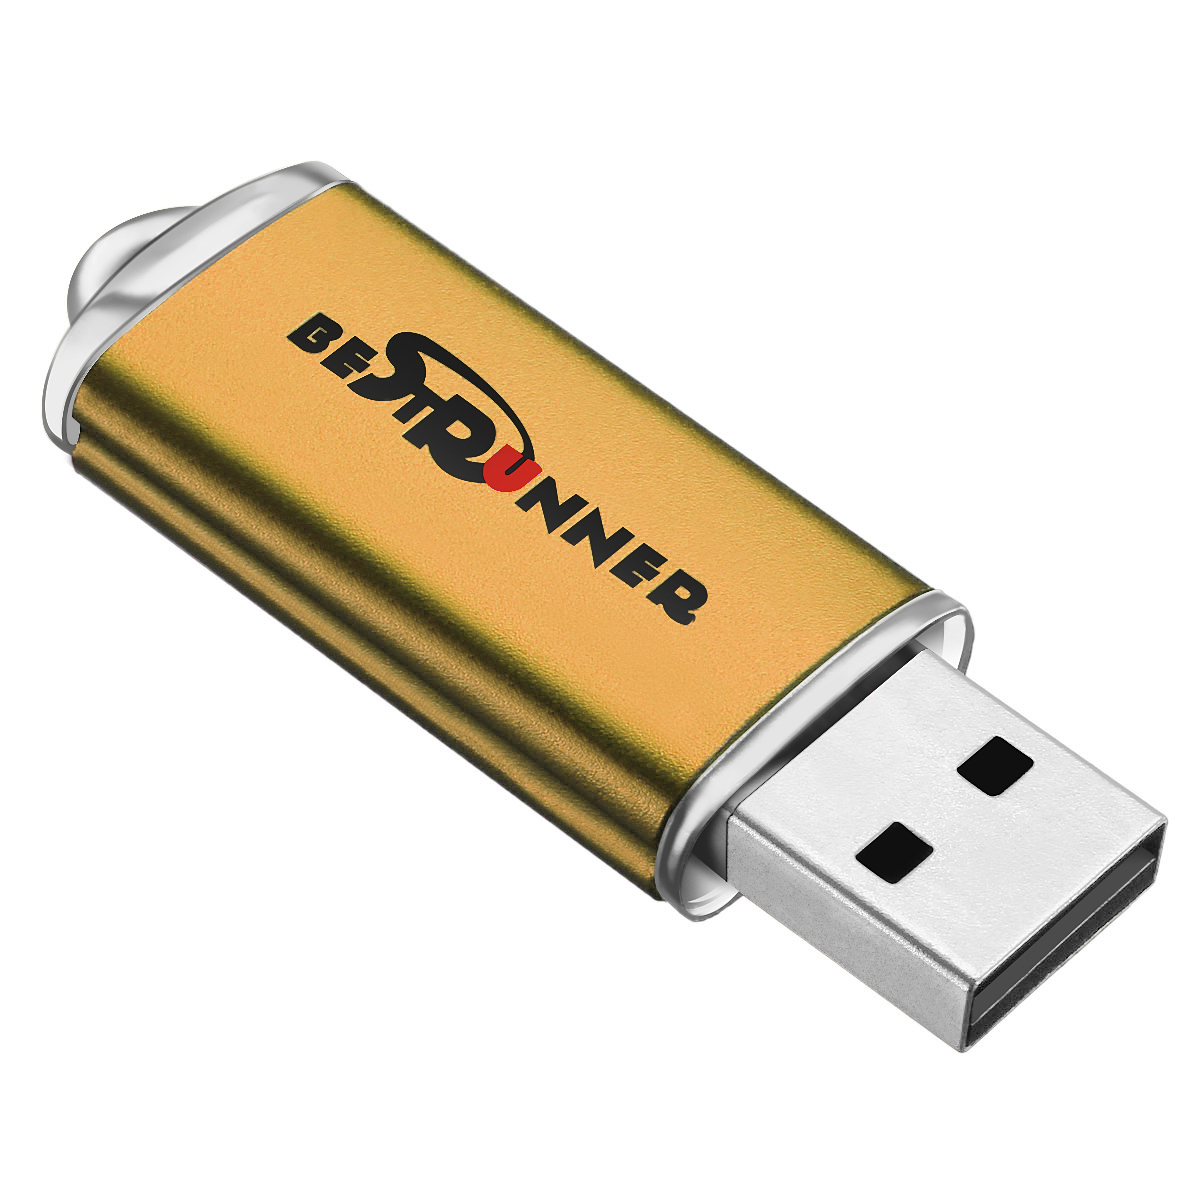 Find BESTRUNNER USB Flash Drive 2 0 Flash Memory Stick Pen Drive Storage Thumb U Disk 64MB for Sale on Gipsybee.com with cryptocurrencies